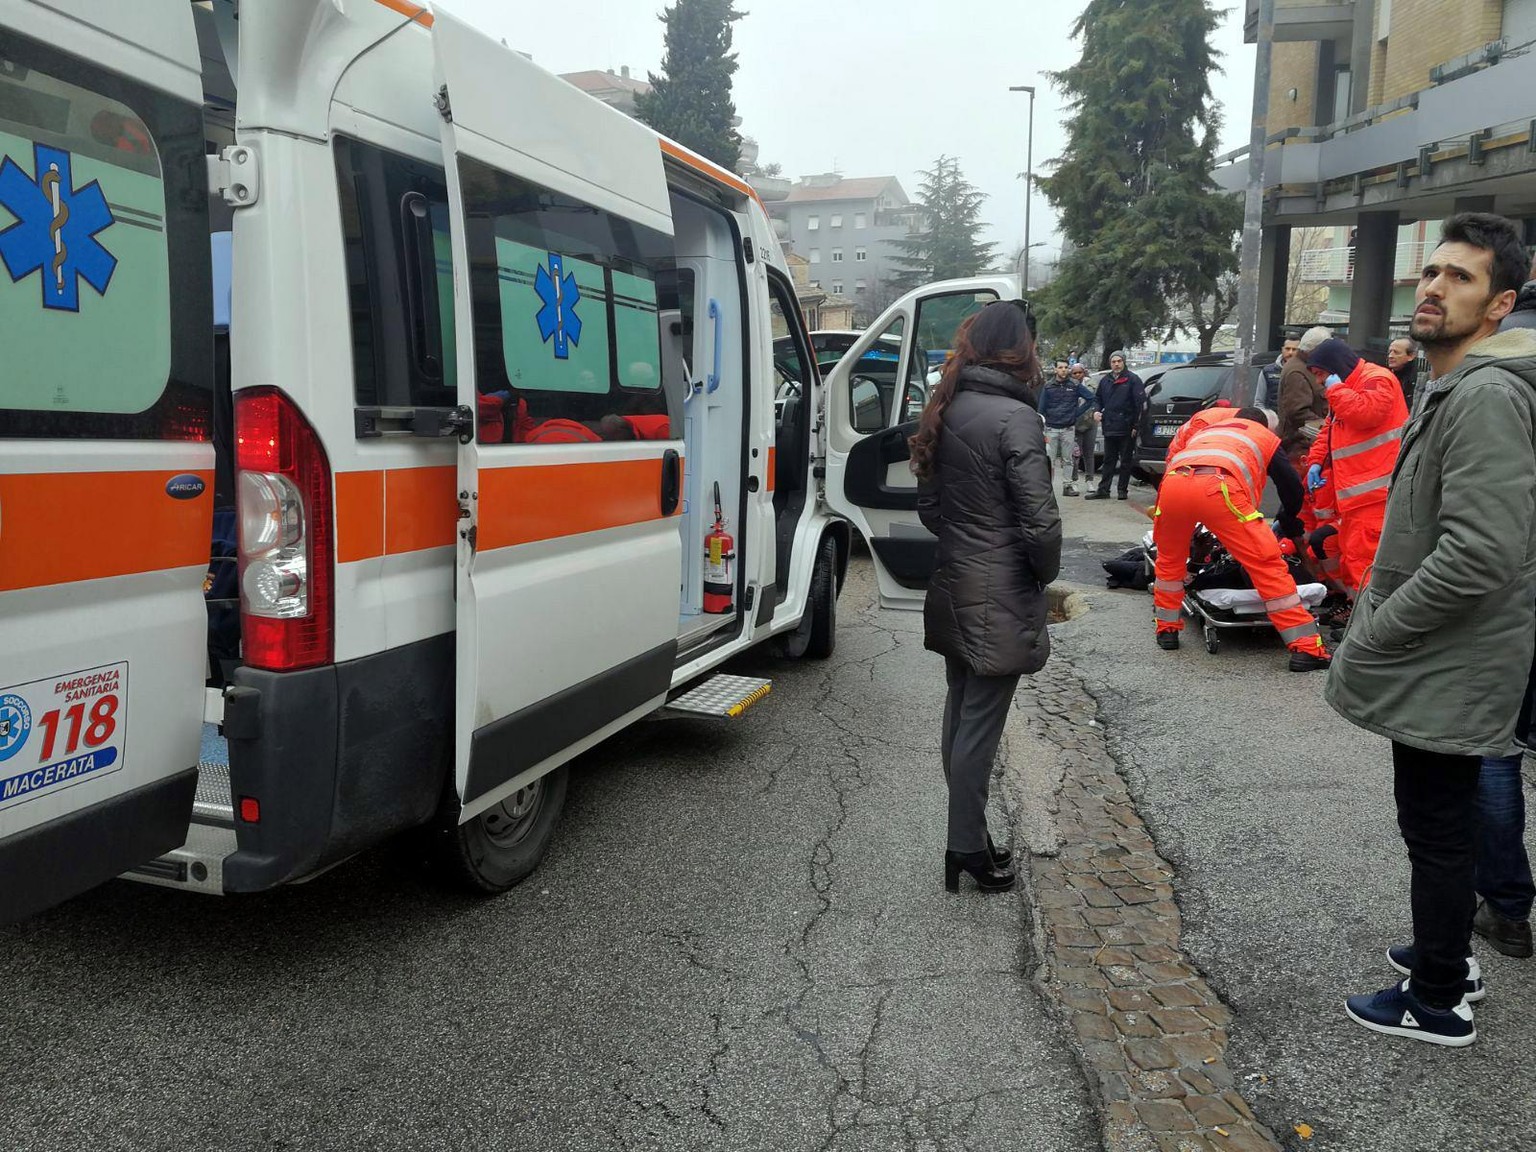 epa06493402 Paramedics treat an injured person that was shot from a passing vehicle in Macerata, Italy, 03 February 2018. According to the local authorities, the town at the eastern Italian coast near ...